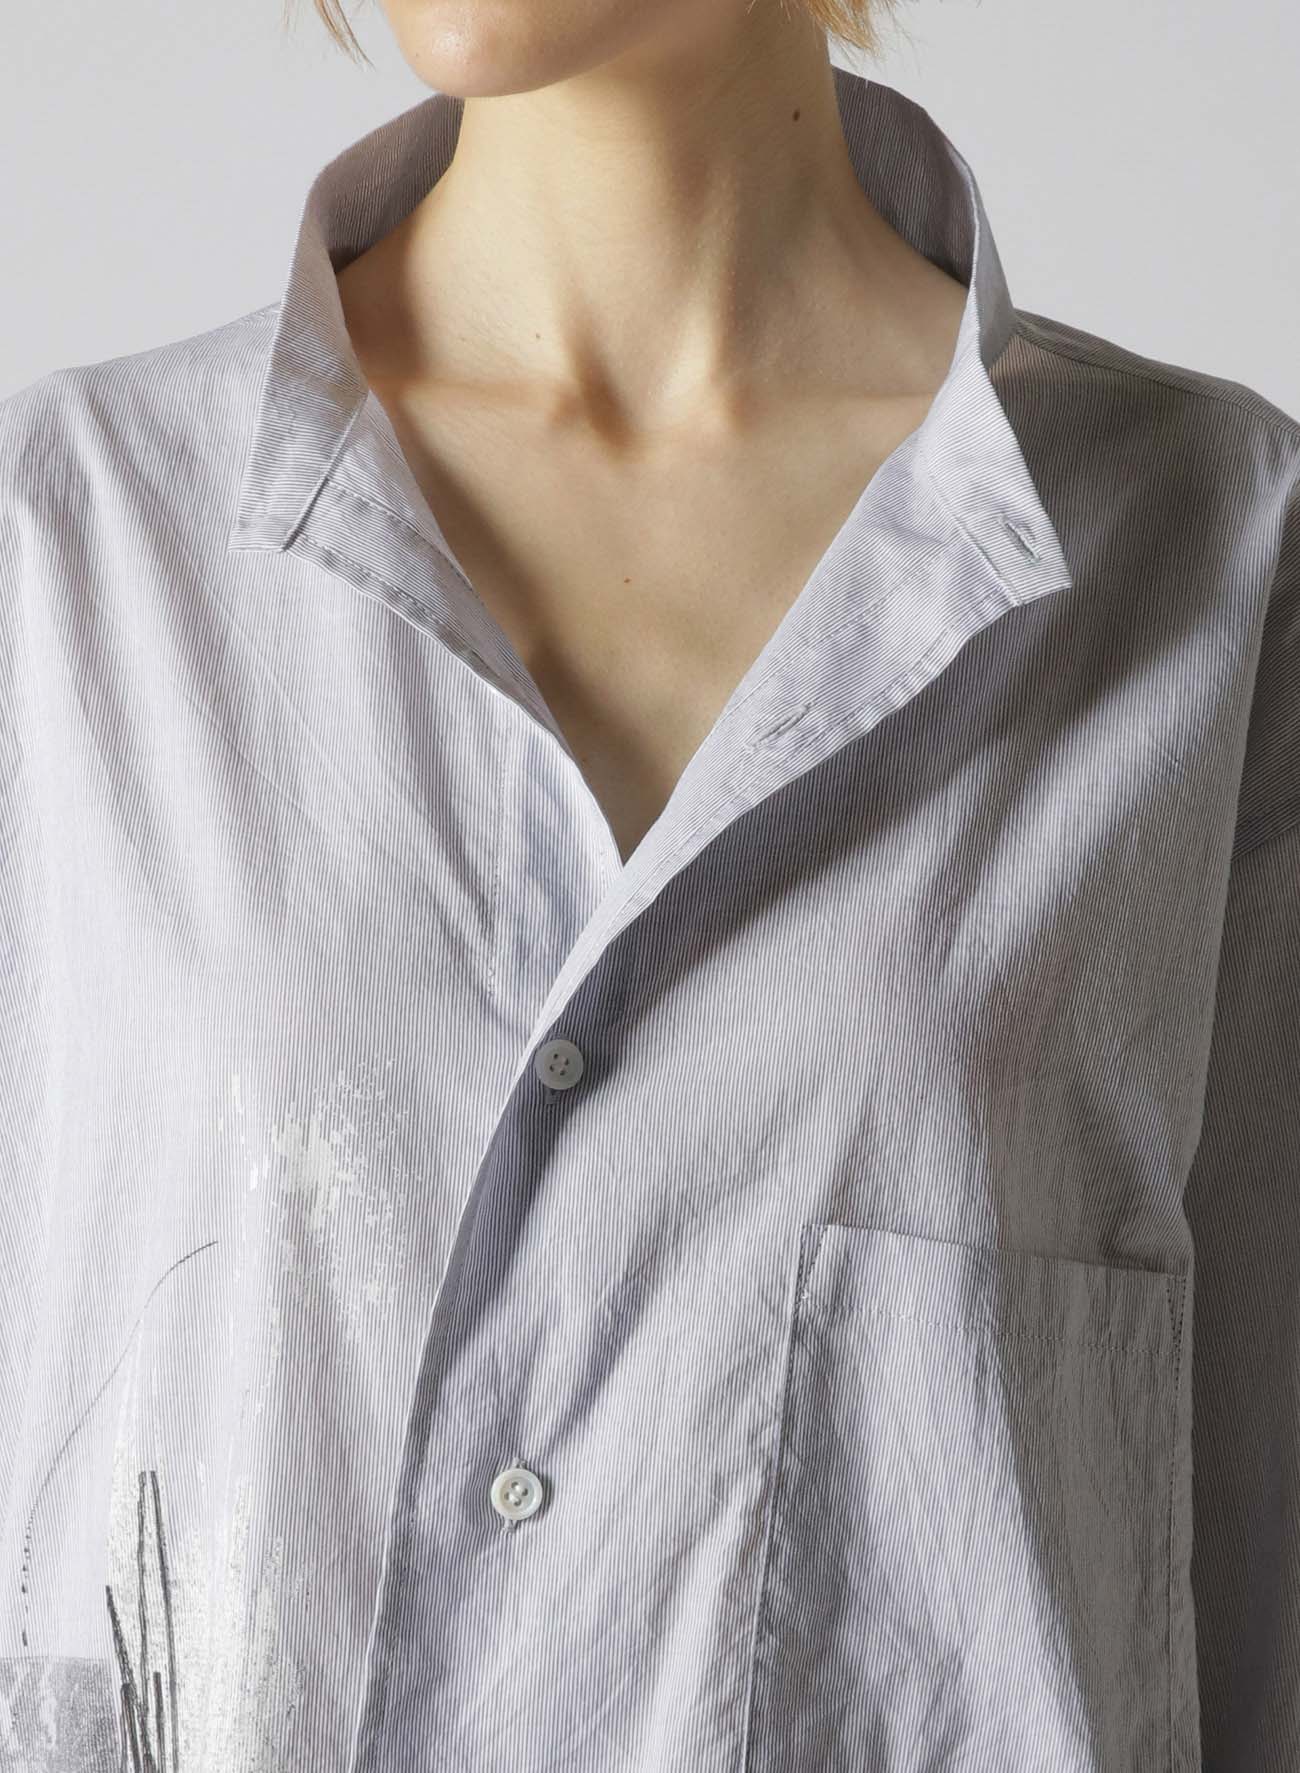 DYED MICRO BROAD Y's COLLAGE PRINT TUCK COLLAR SHIRT